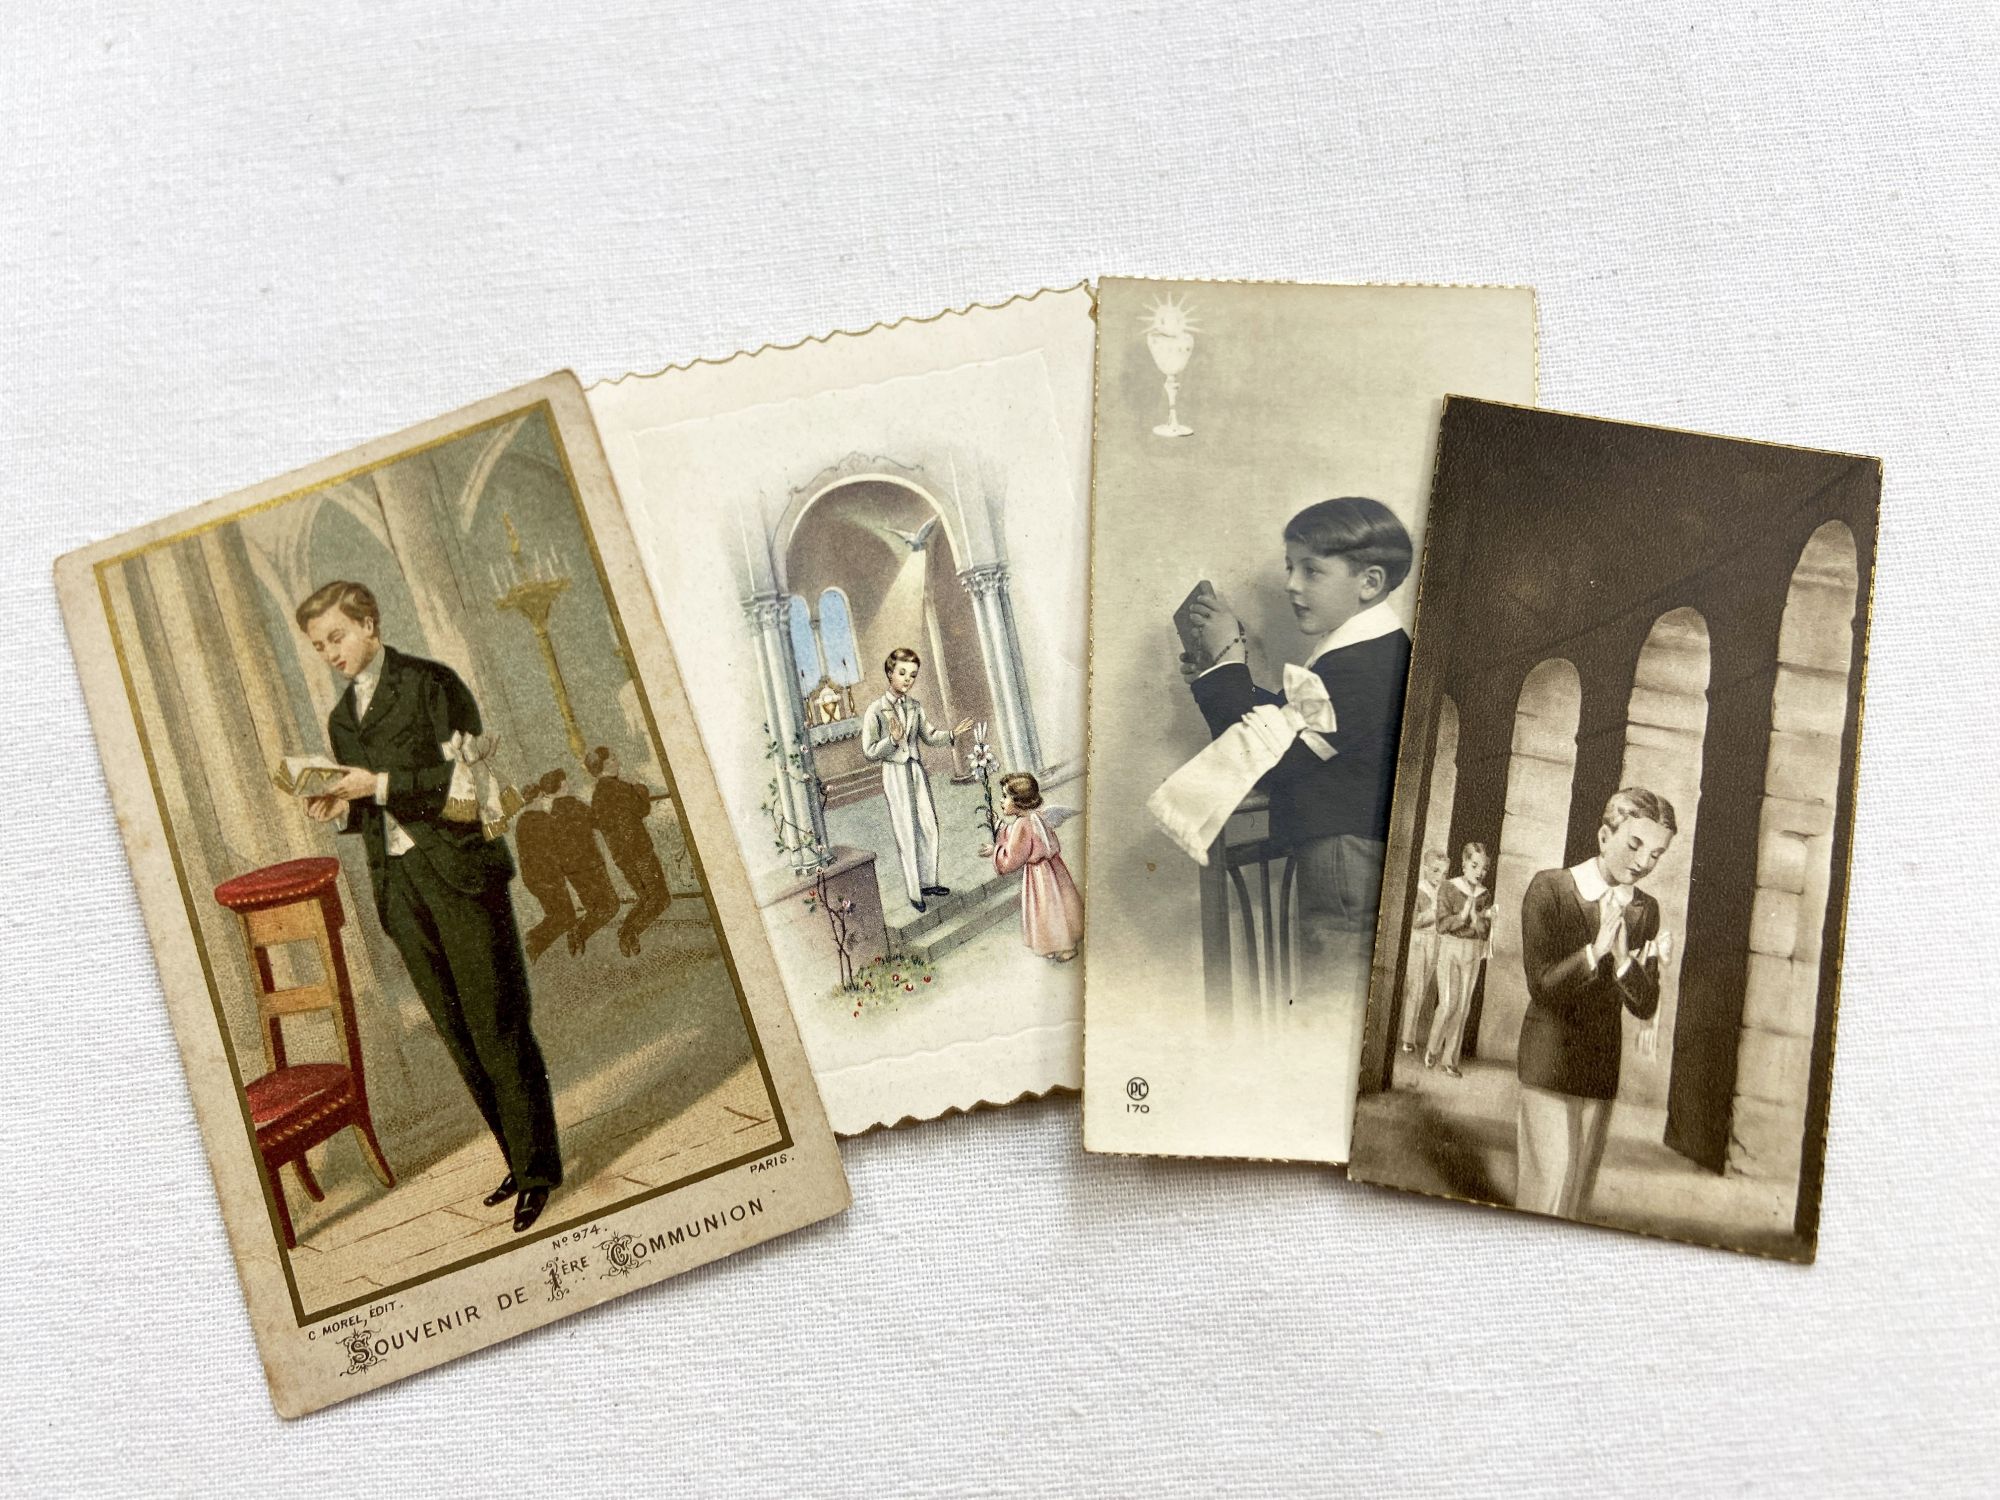 4 French religious cards - First communion cards from 1930s and 1960s